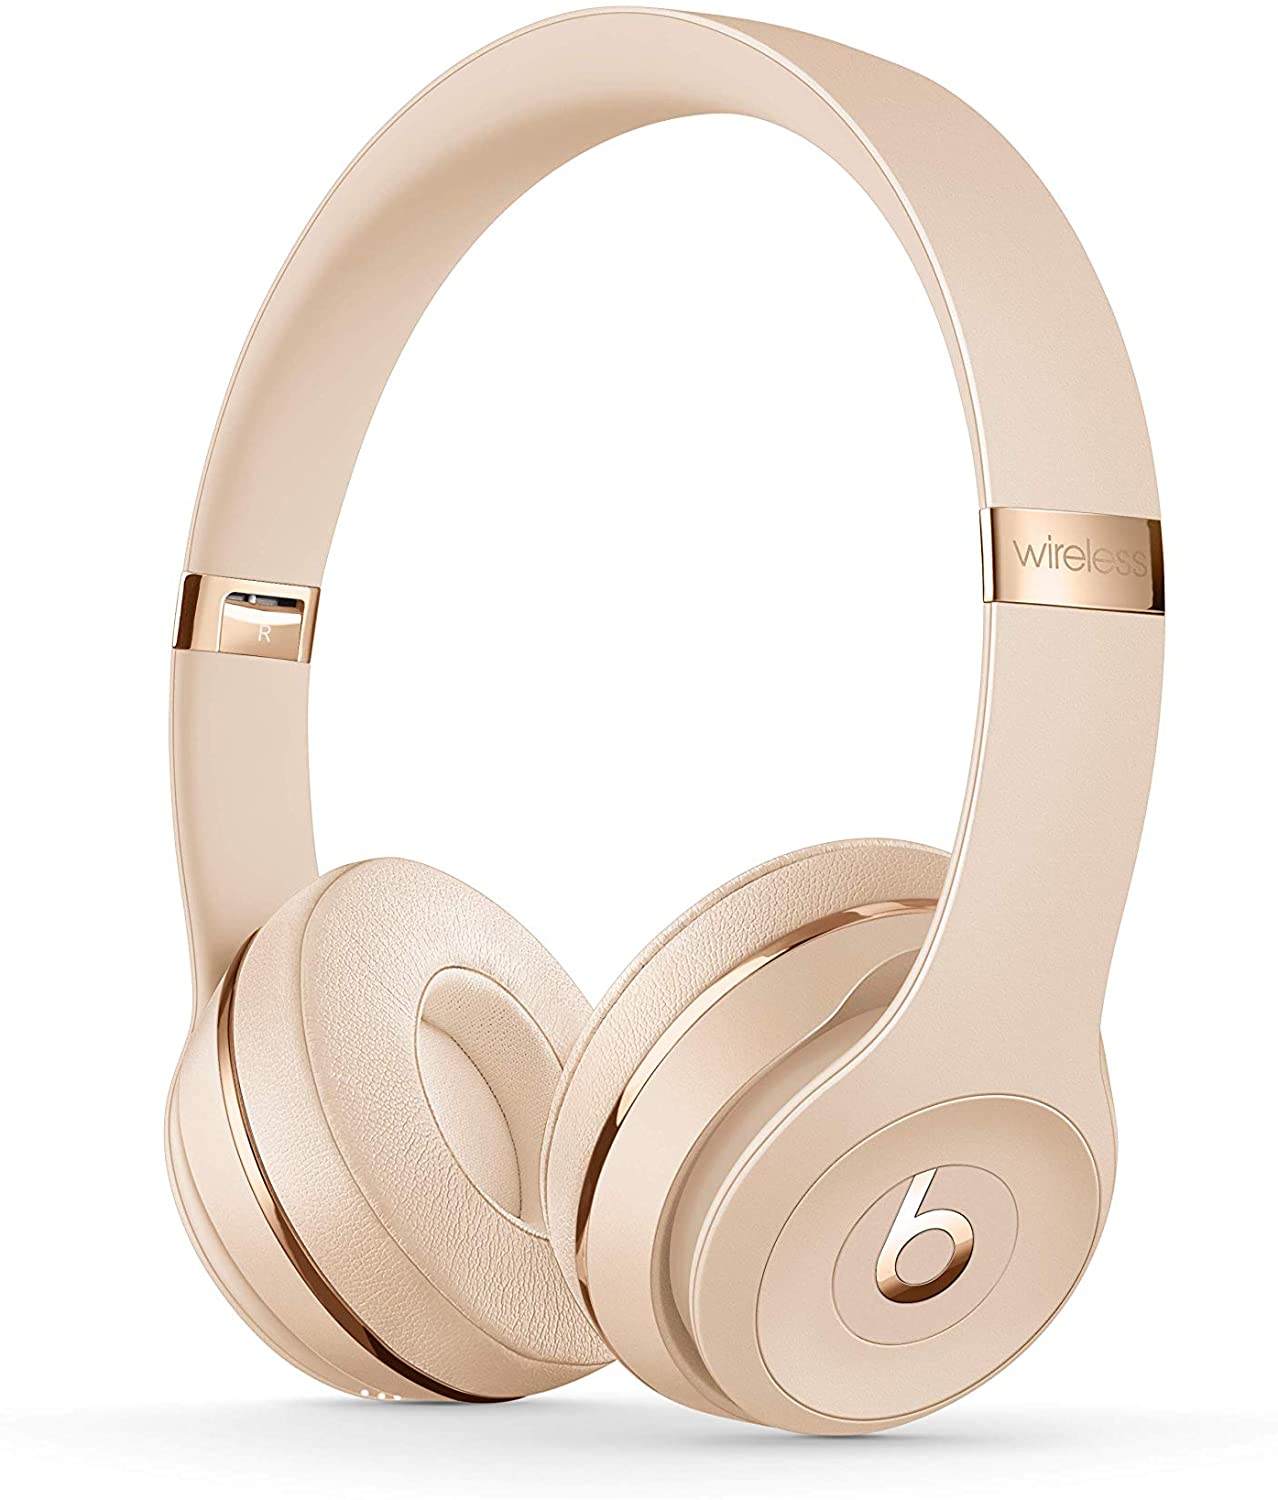 Beats by Dr. Dre Solo3 Wireless Headphones MUH42LL/A Satin Gold - US